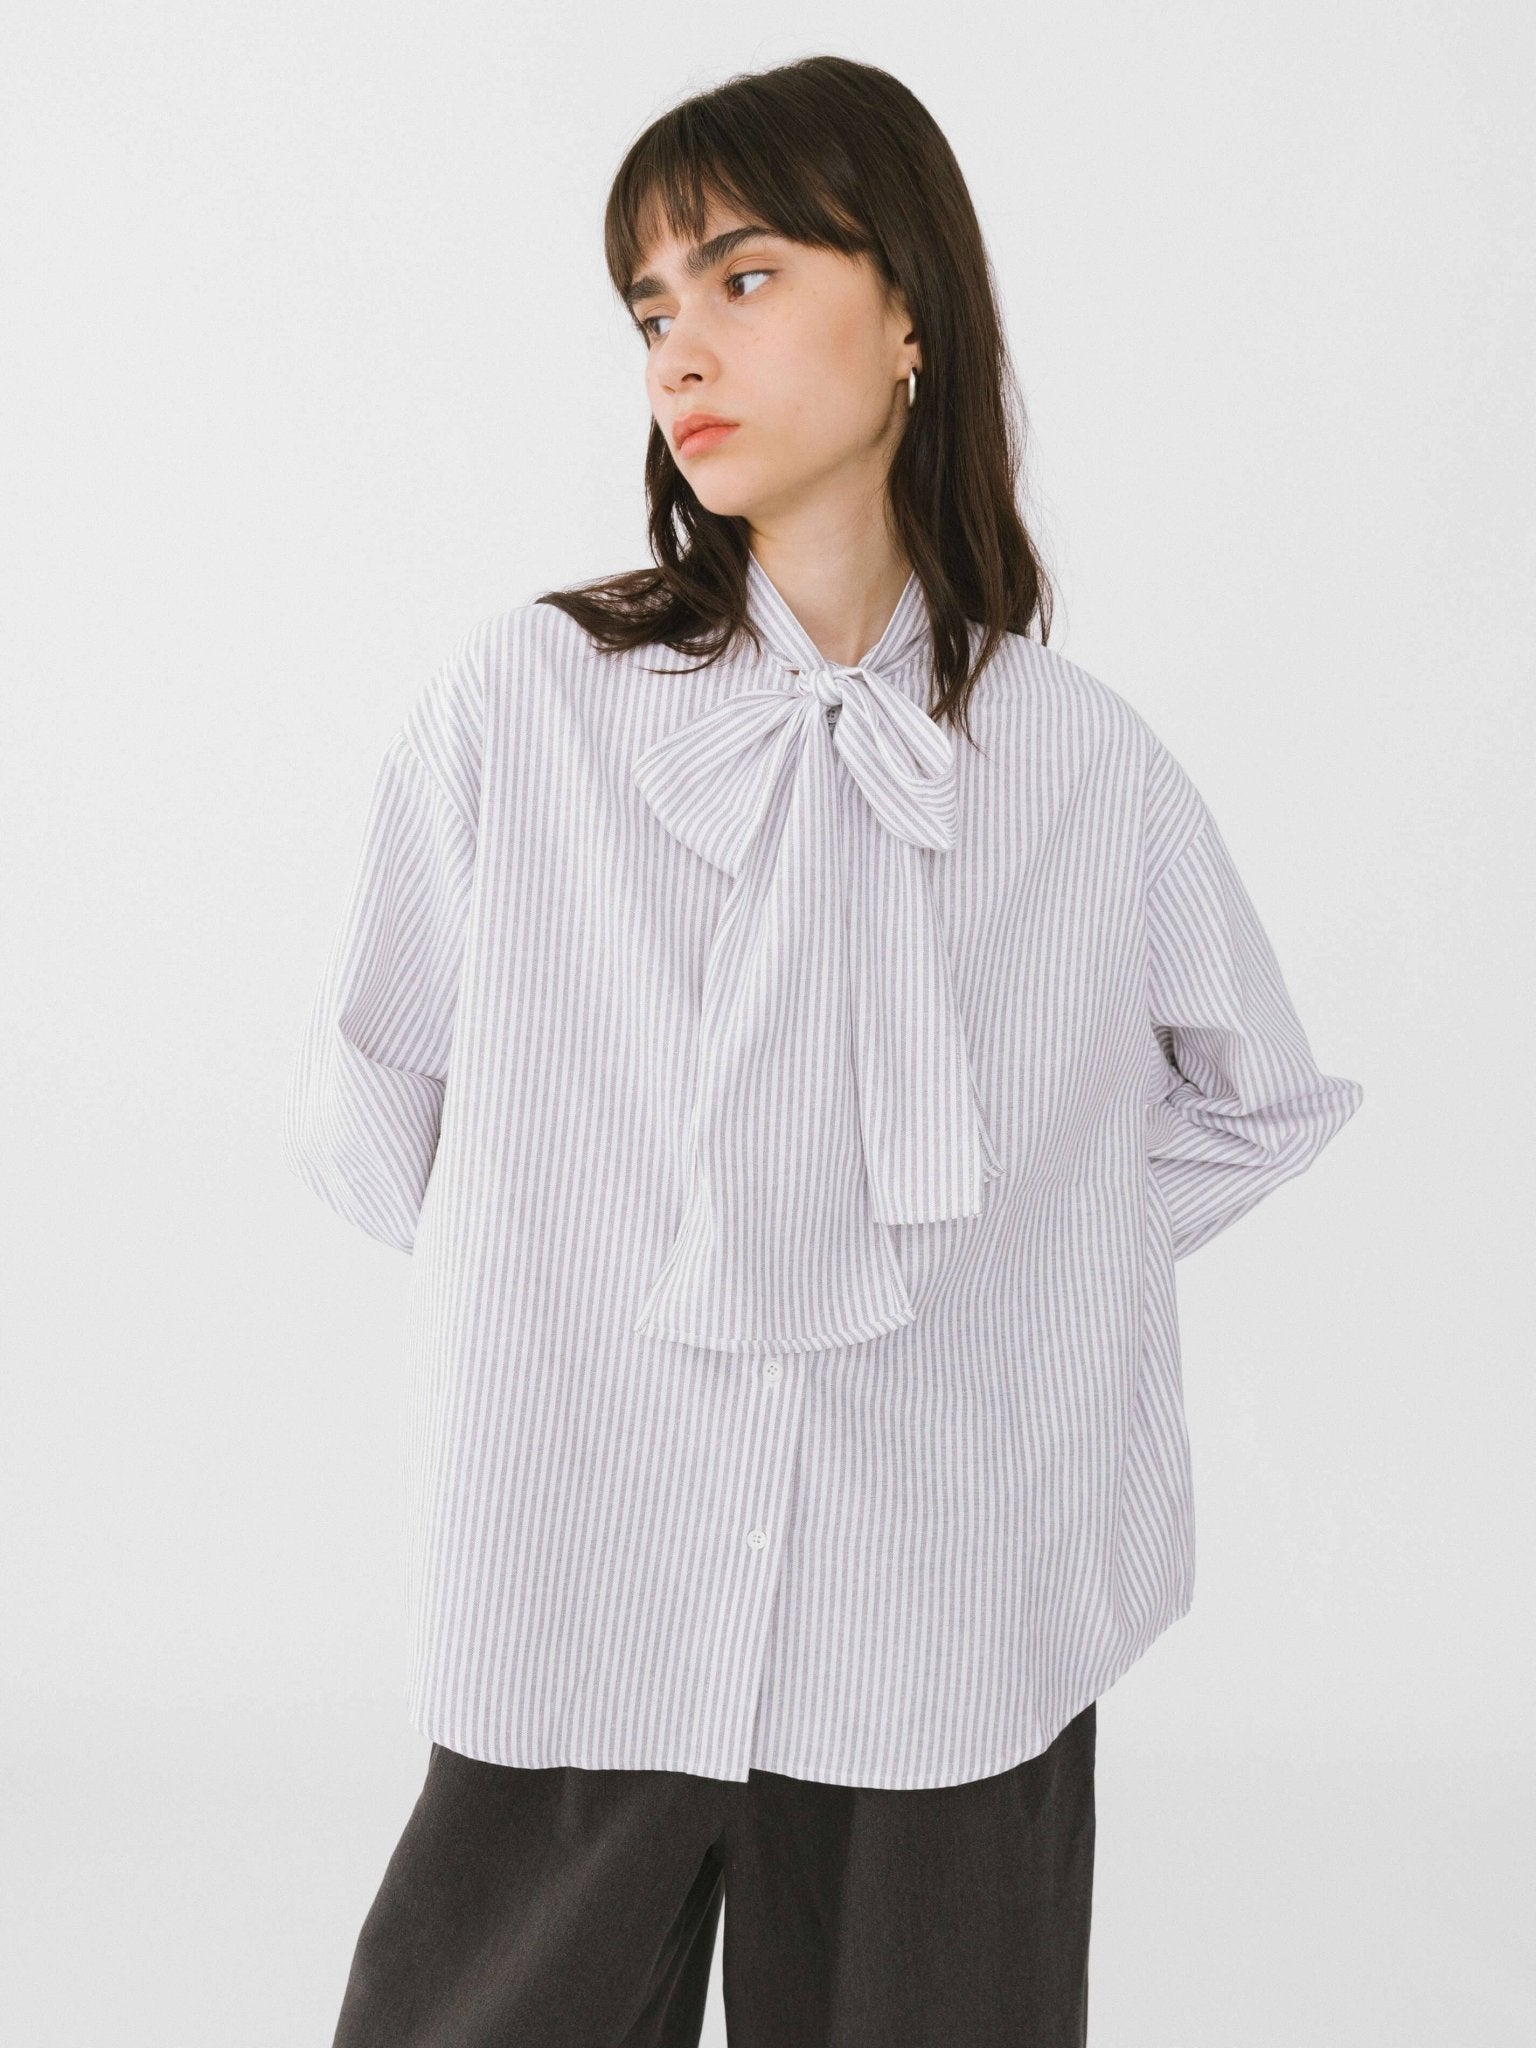 CUBIC - STRIPE SHIRT WITH BOW - Annabelle 87